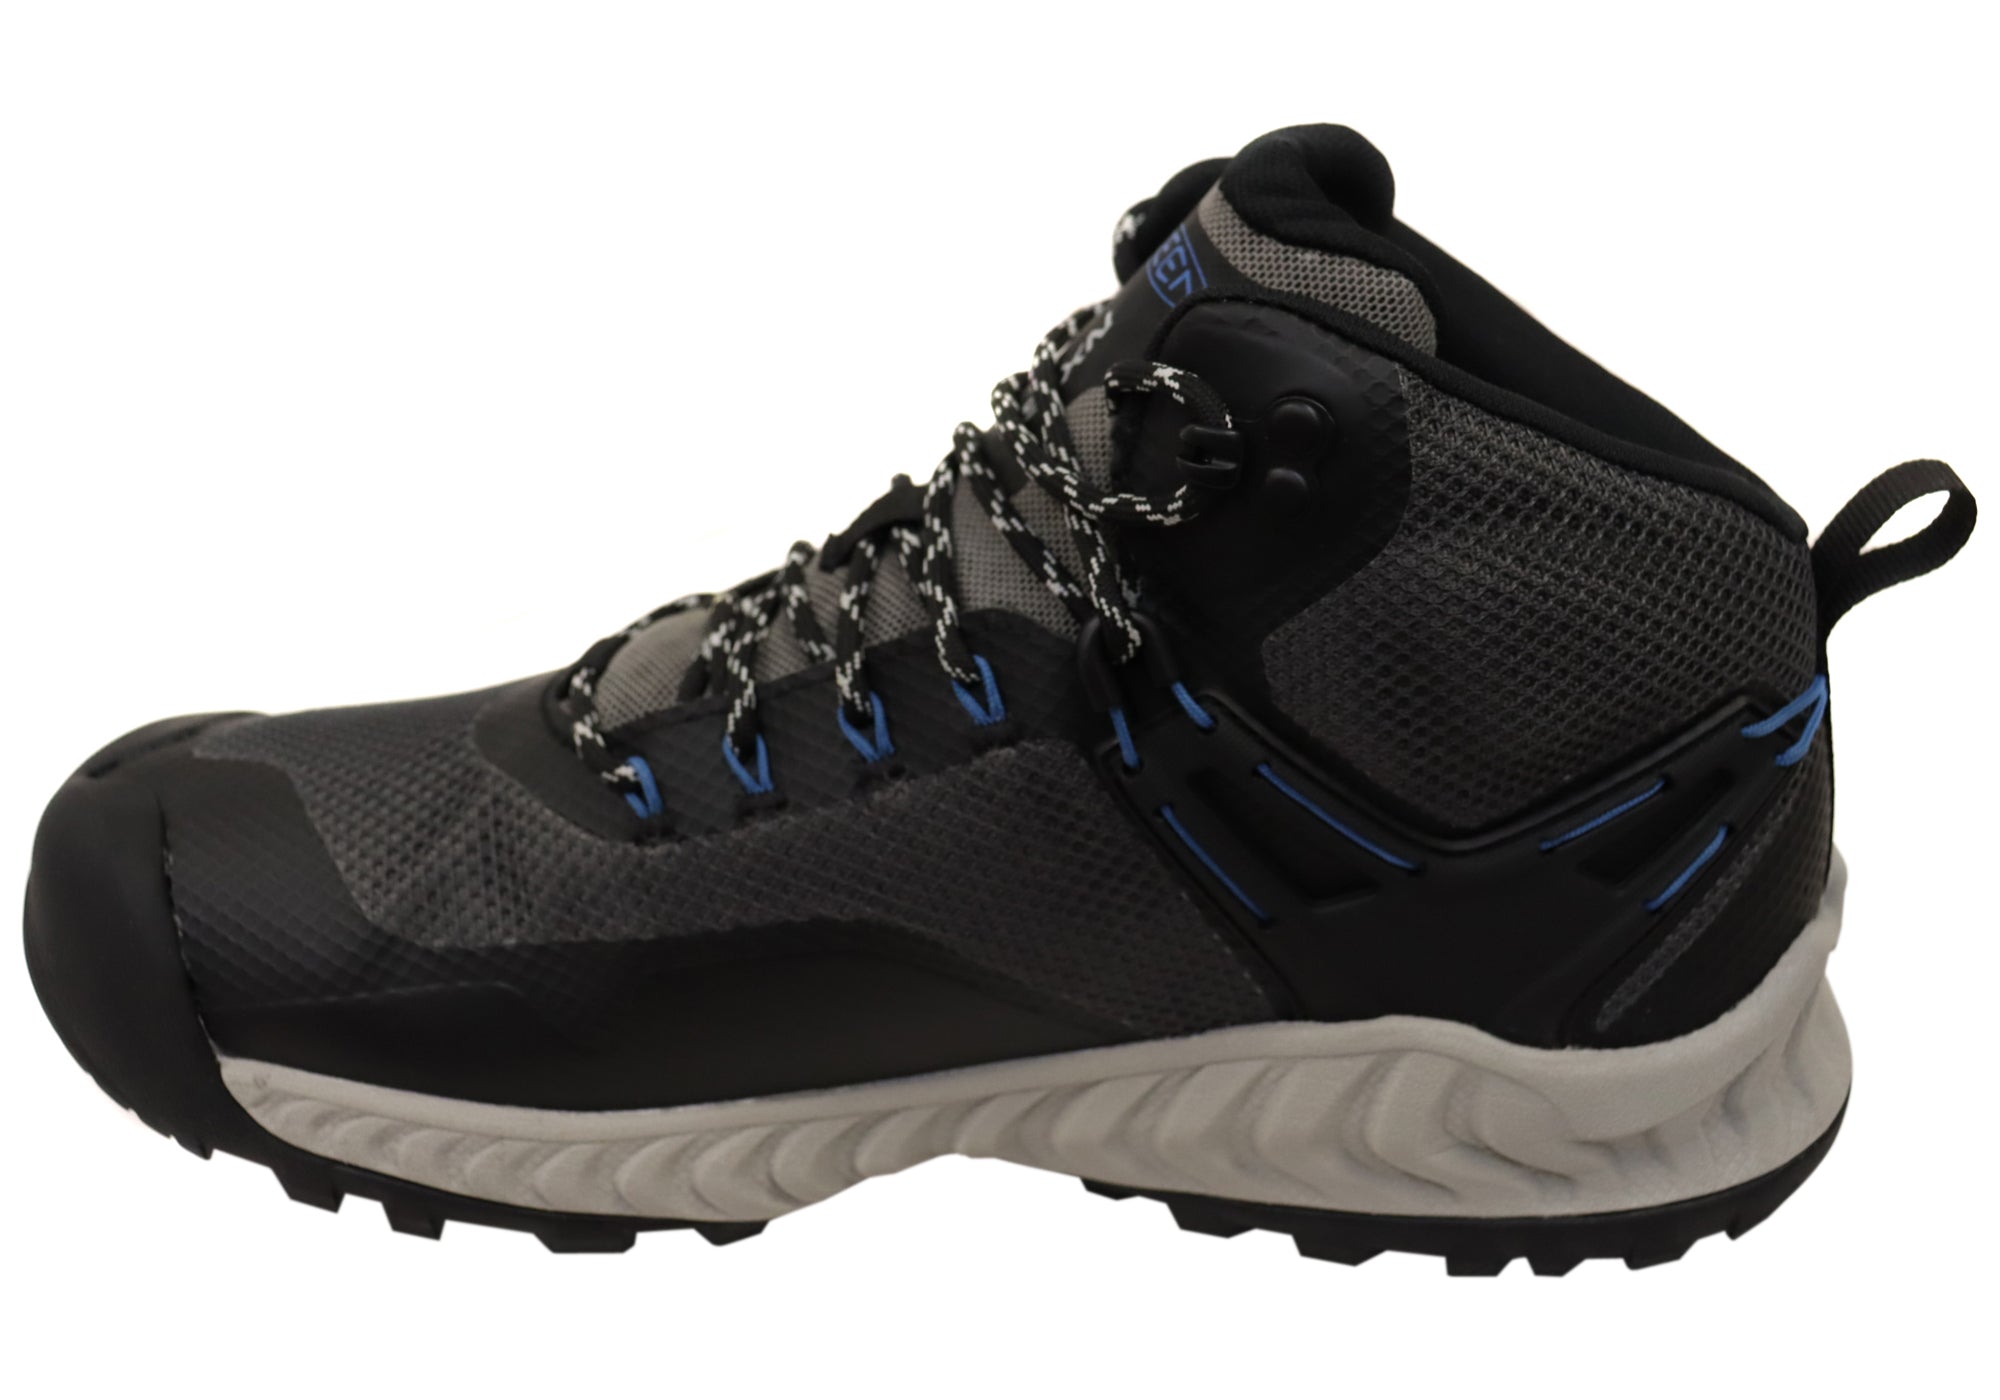 Keen Mens Comfortable Lace Up NXIS EVO Mid Waterproof Boots